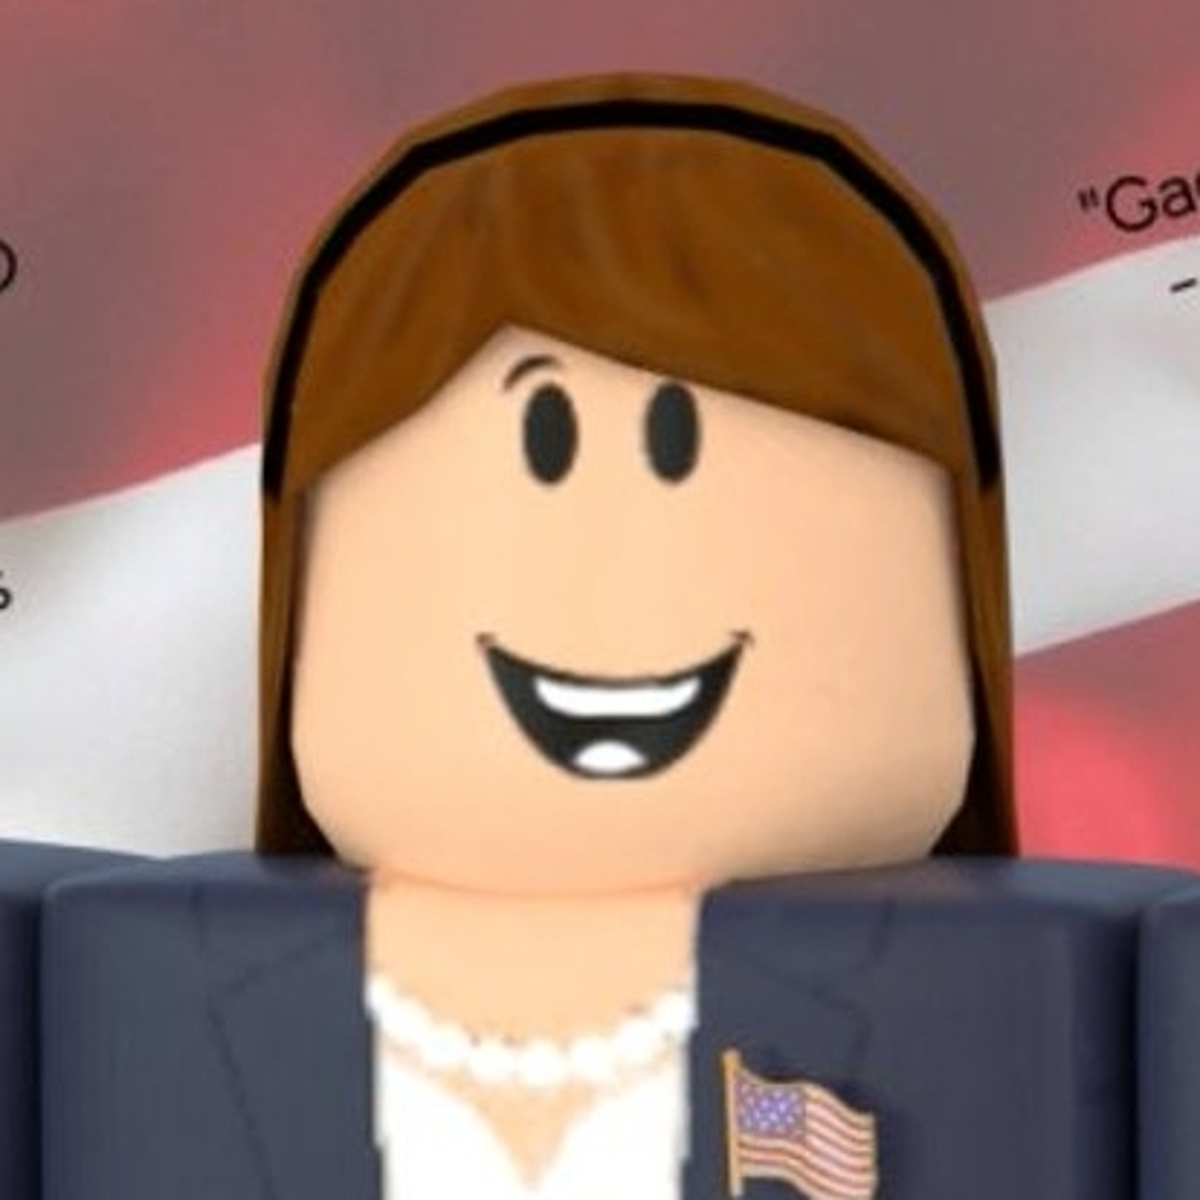 A Roblox player infiltrated the White House press corps